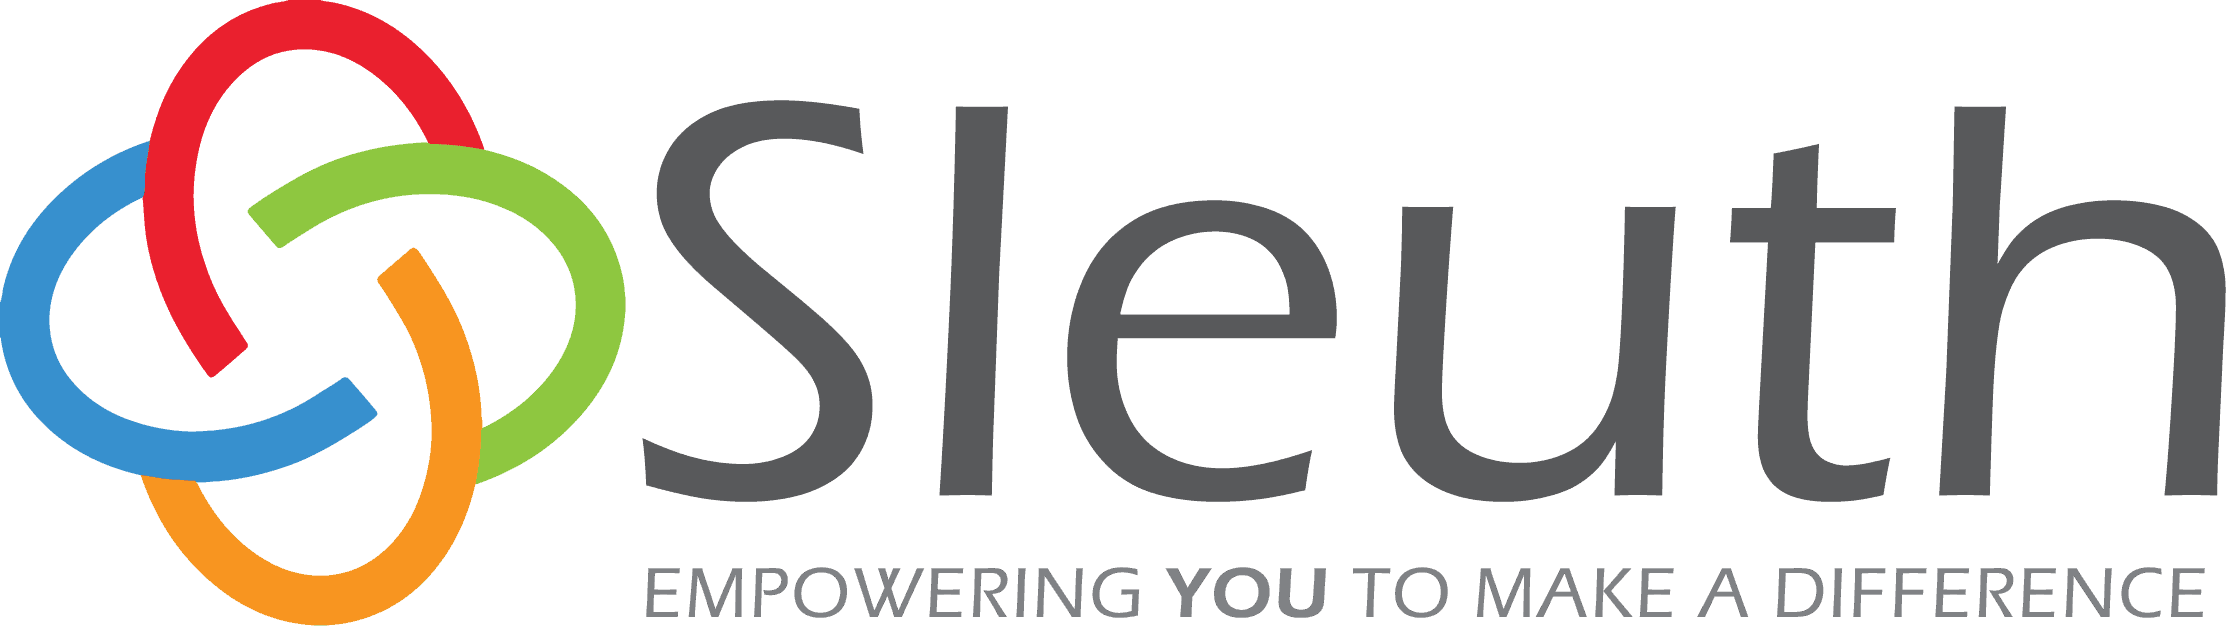 Sleuth. empowering you to make a difference.